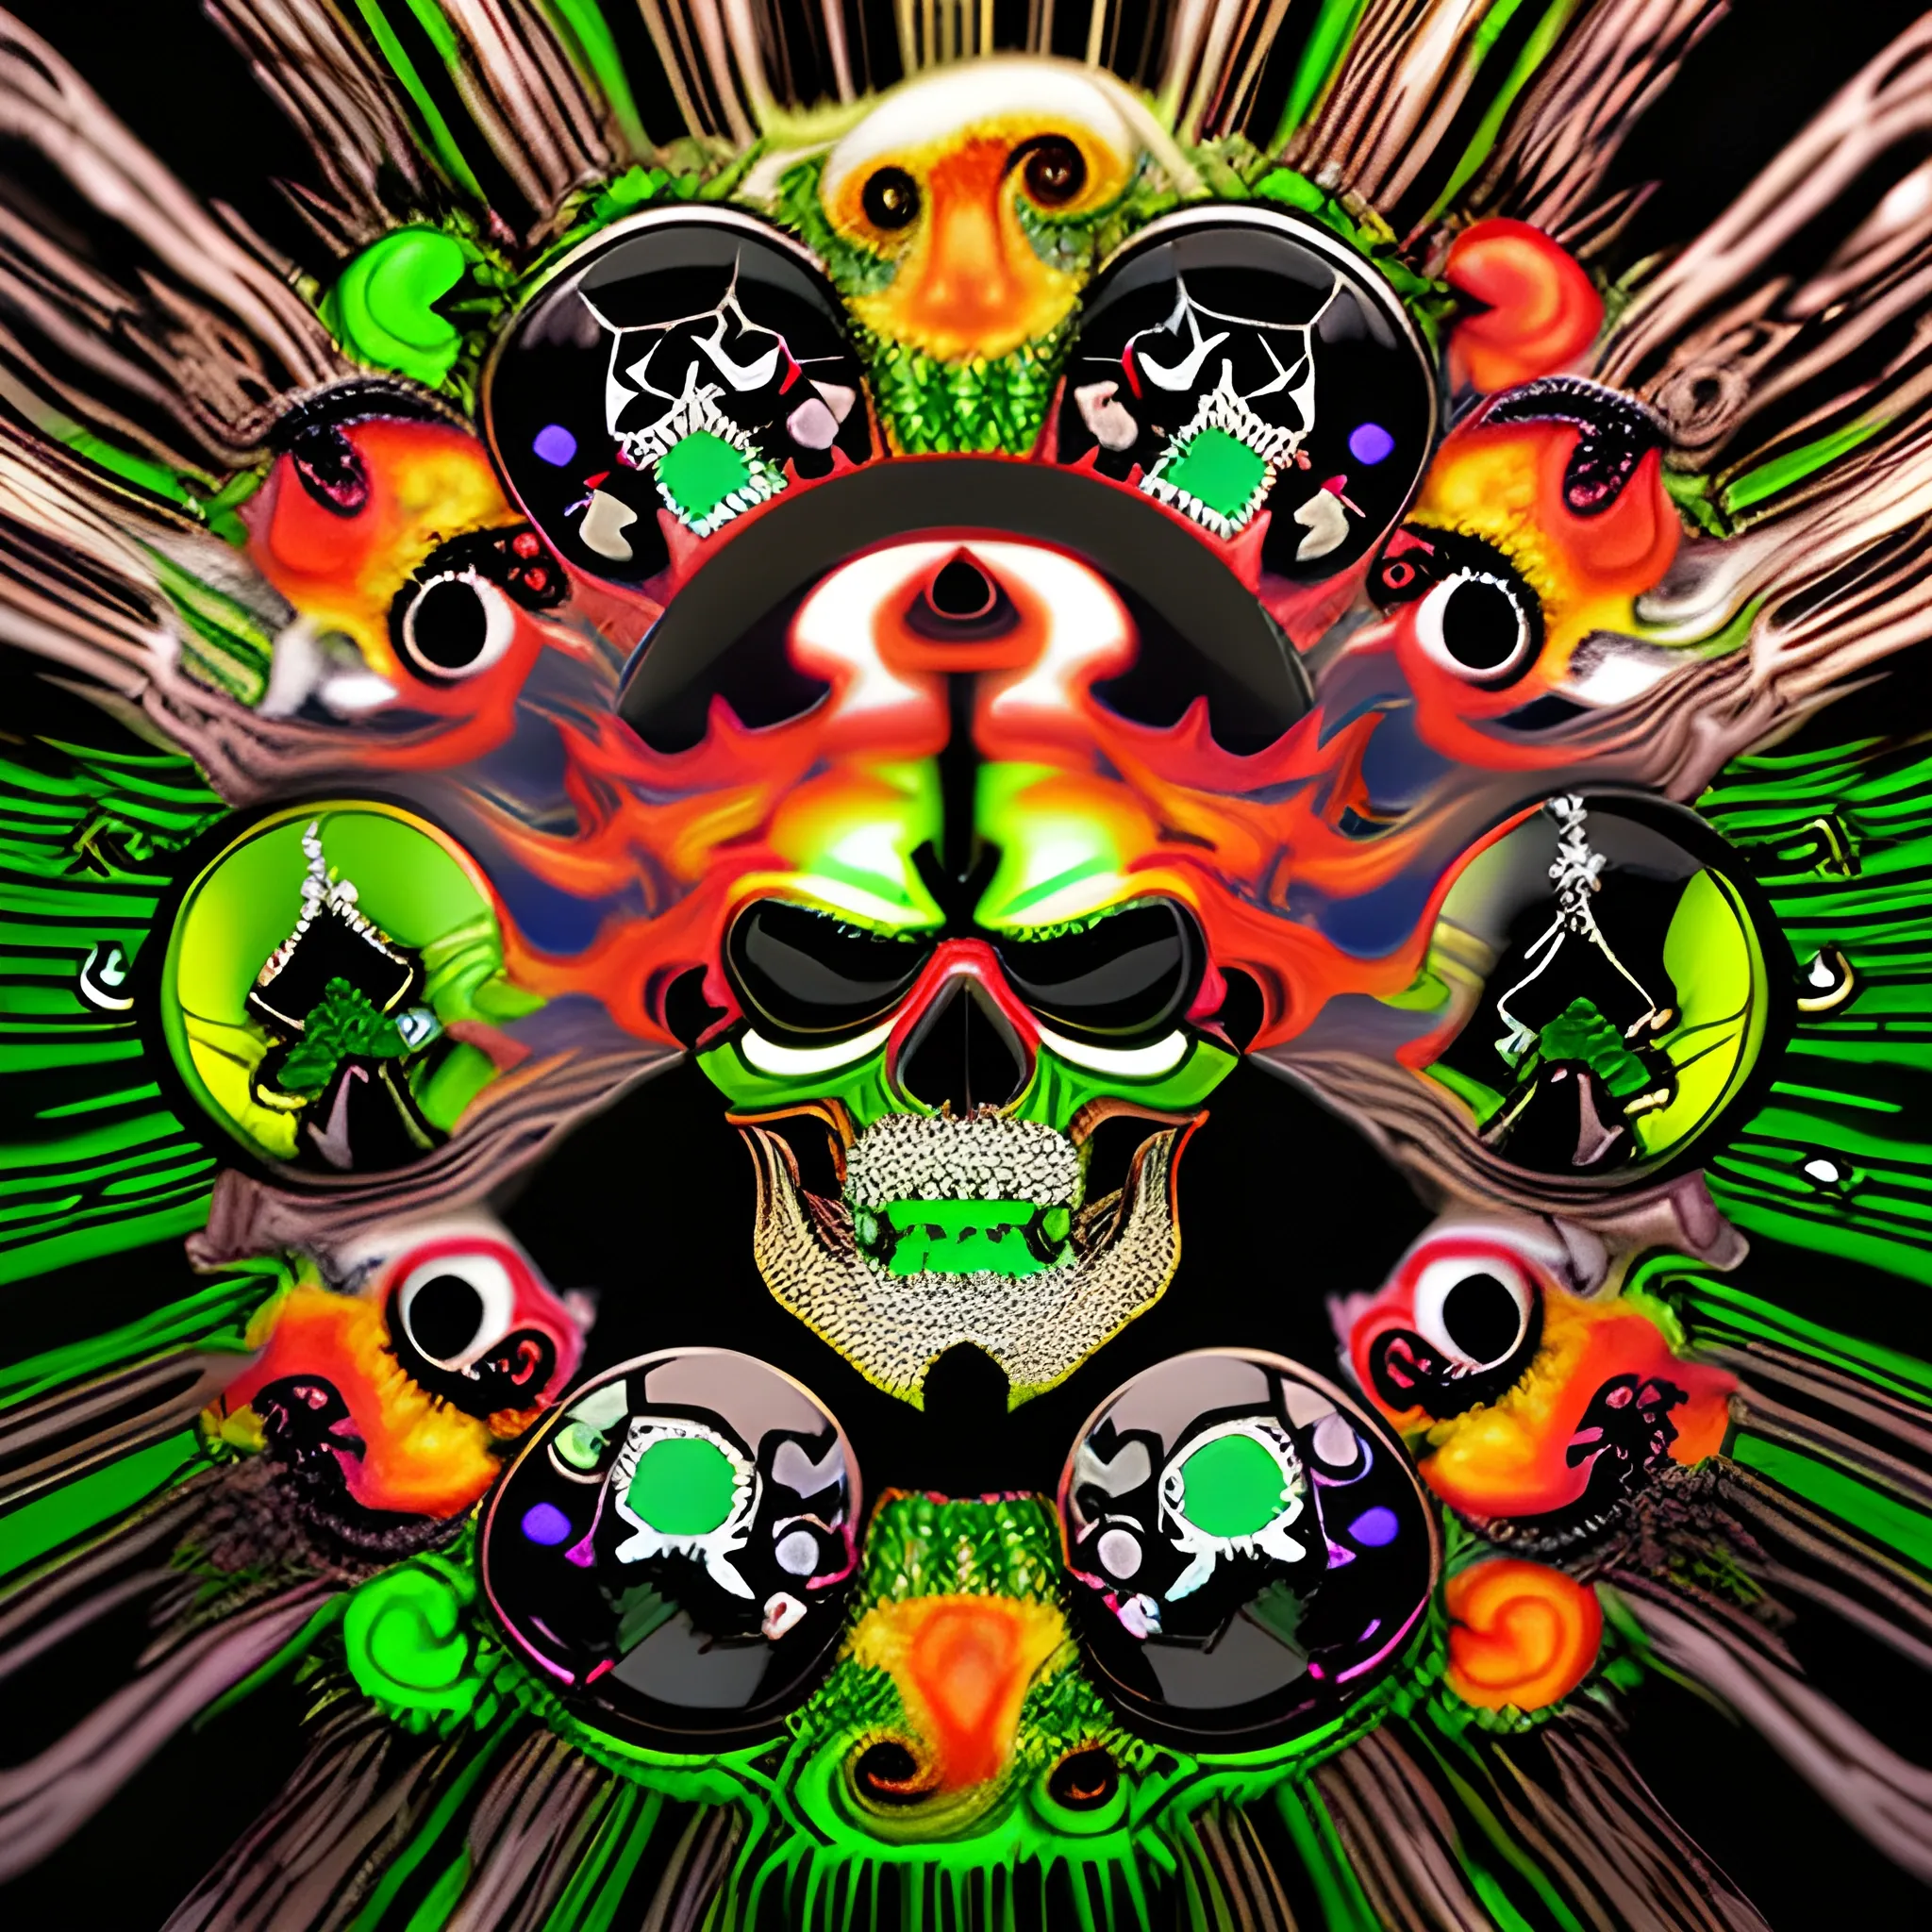 rfktrstyle A 4k death skull controlling and manipulating out of control fire and water, multicolor fire, freshy, surrounded by chibiStyle hooded-sugar-skulls, (yellow&red colored fire)(black&green colored water:1.5), tangled, elemental splash, detailed glowing demon eyes, Dynamic, vivid, creative, soft shadow, perfect anatomy, perfect hands, hyperdetailed artwork,tshirt design,  perfectly centred, neo-expressionist oil paint, centred, posing portrait by hajime sorayama